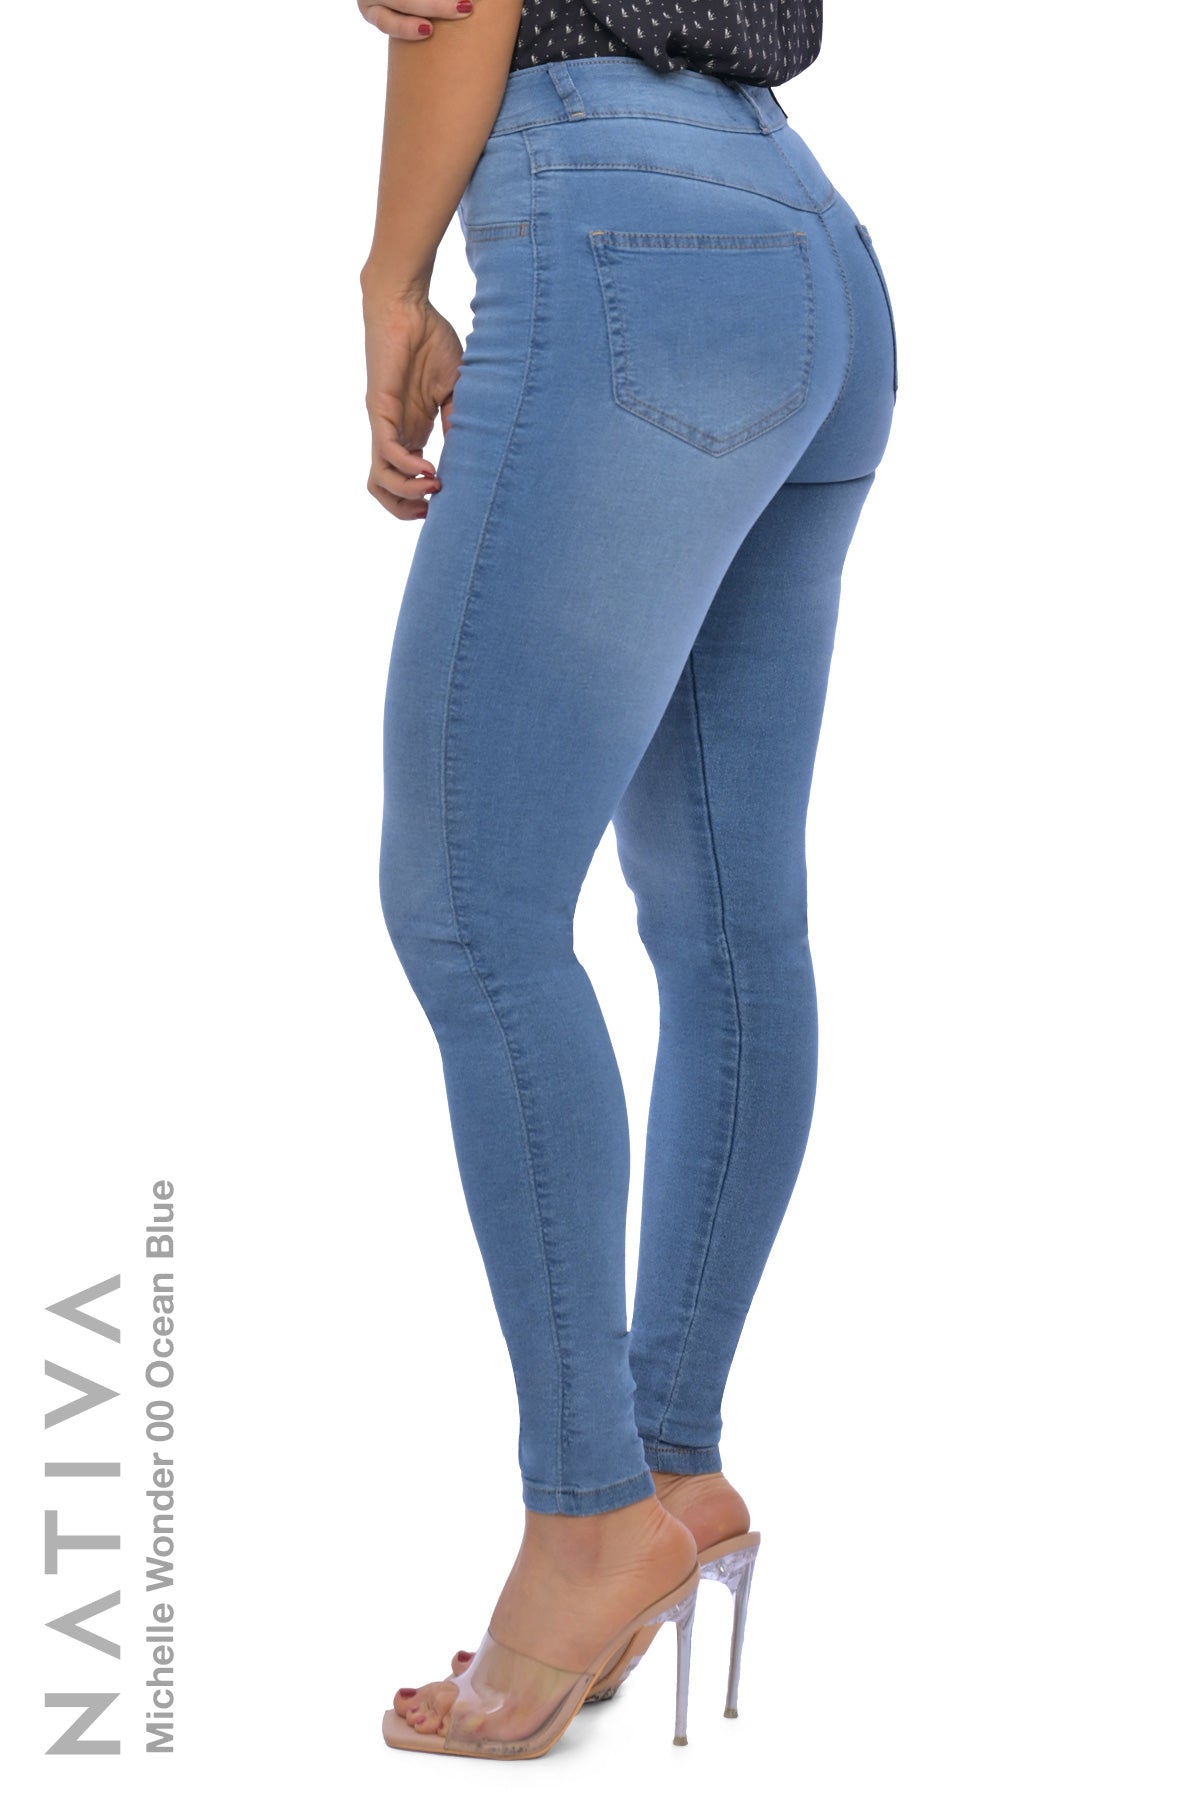 NATIVA, STRETCH JEANS. MICHELLE WONDER 00 OCEAN BLUE, High Shaping Capacity & Firming, Casual Everyday Look, Hi-Rise Super Skinny Jeans